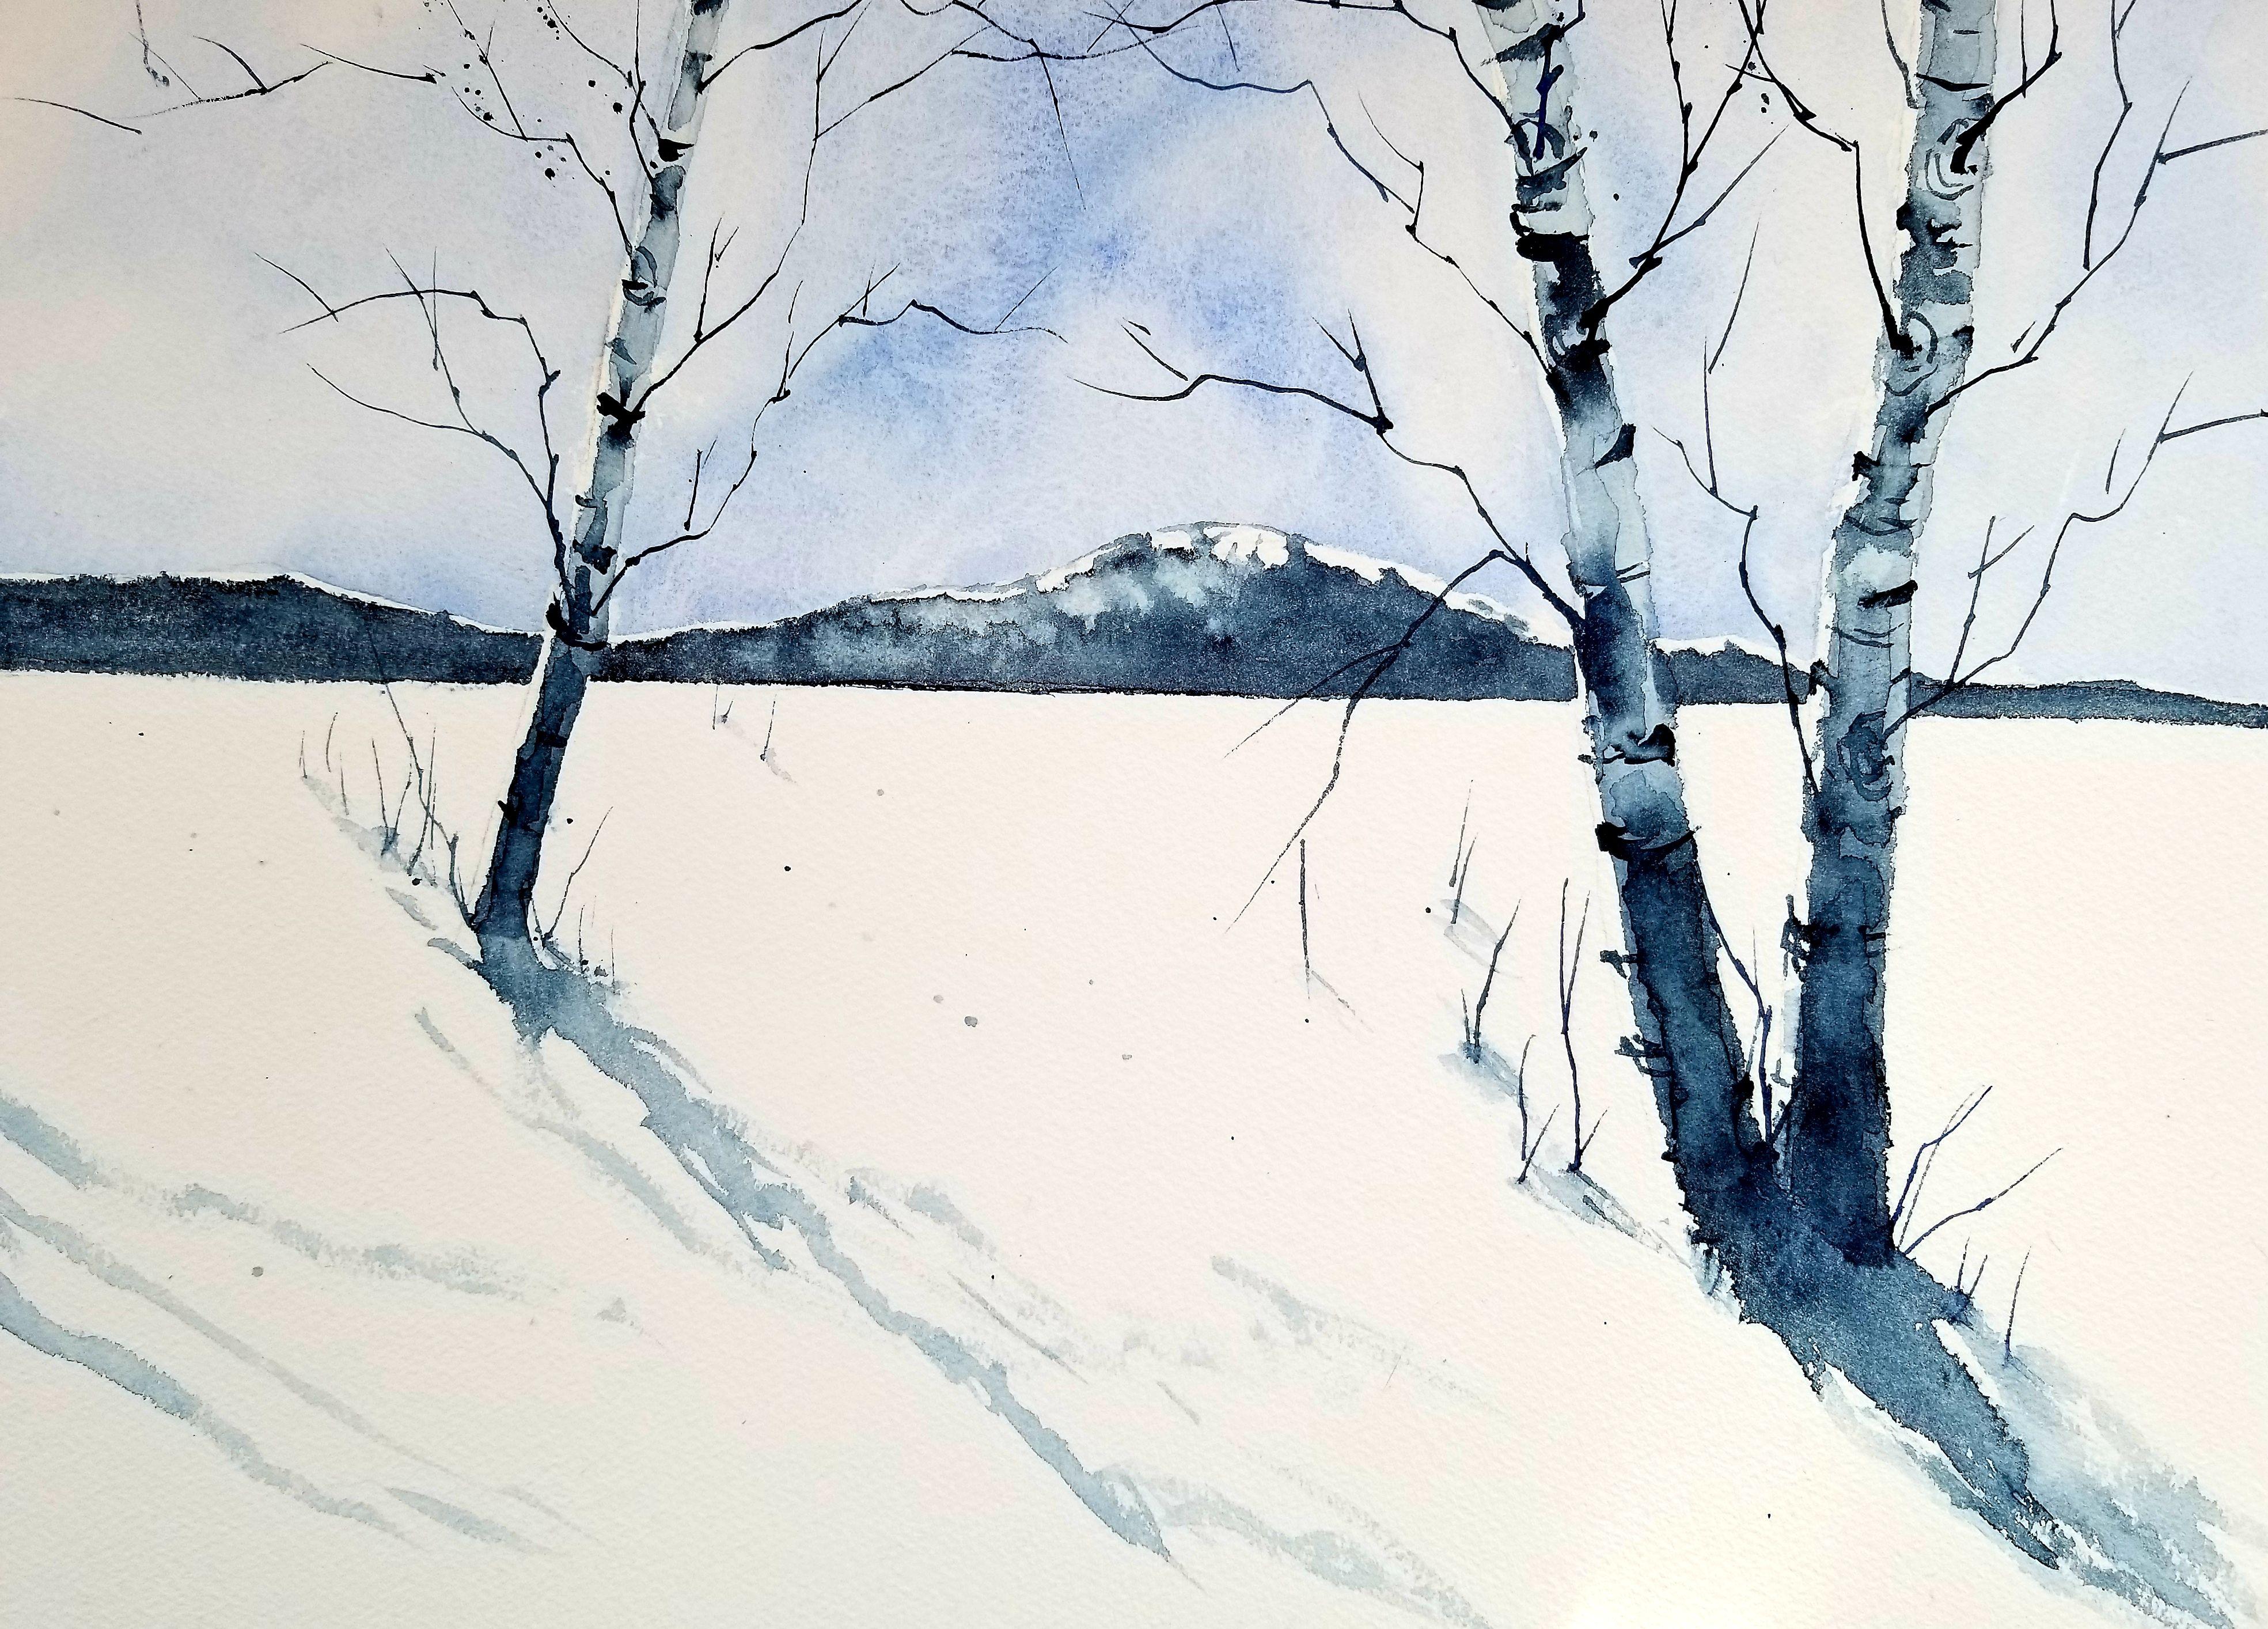 Winter Birches, Painting, Watercolor on Watercolor Paper - Art by Jim Lagasse